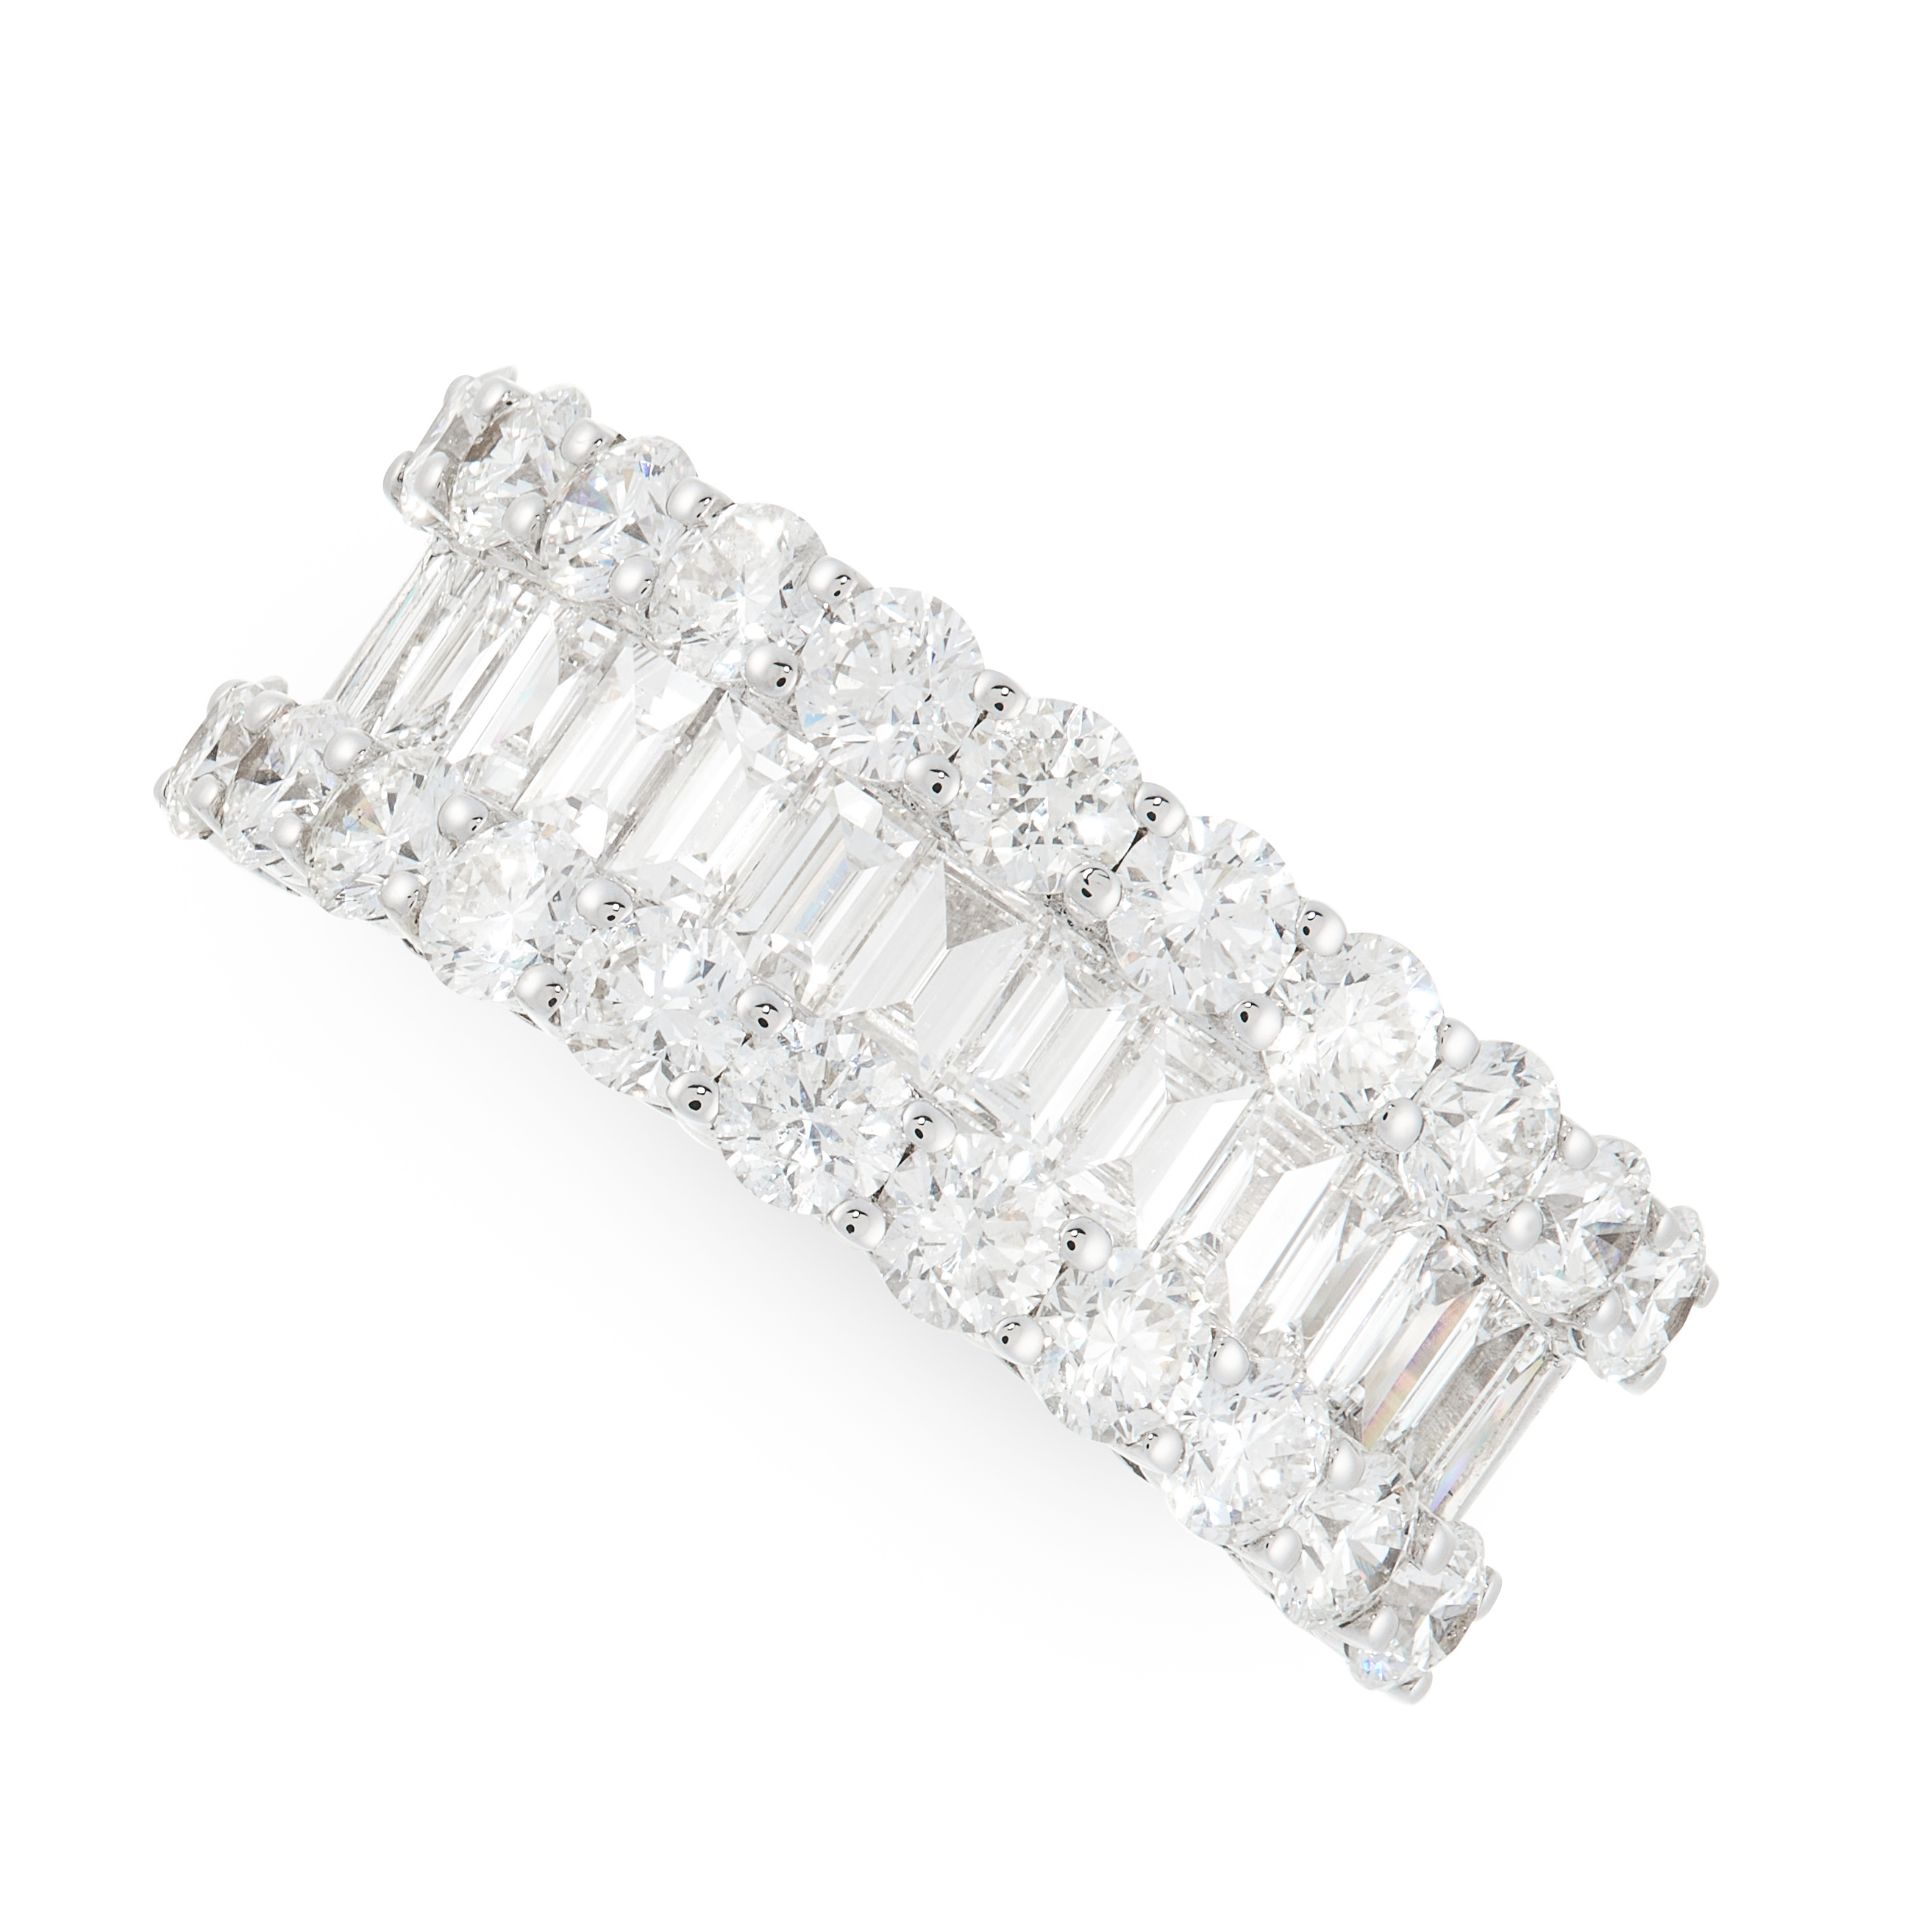 A DIAMOND HALF ETERNITY RING in 18ct white gold, set half way around the band with a row of baguette